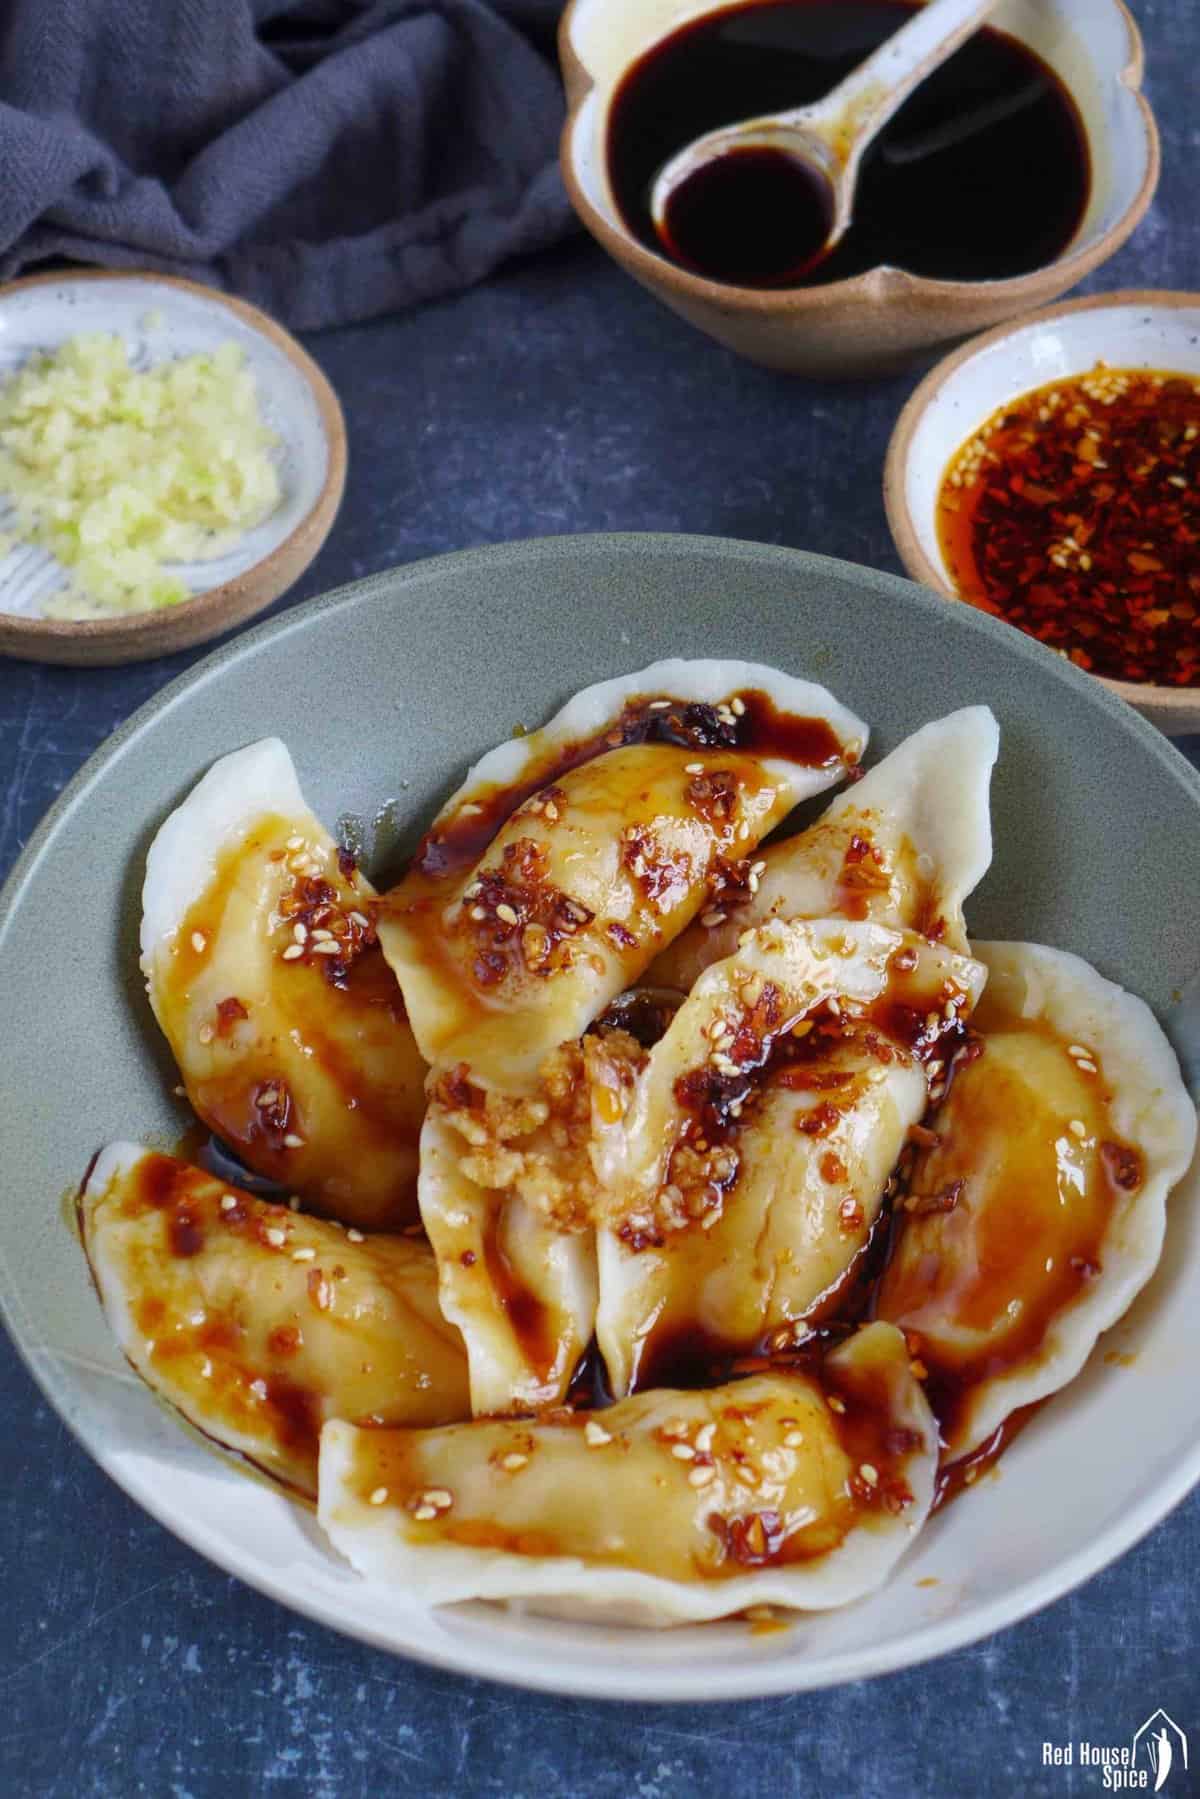 boiled dumplings seasoned with sweet soy sauce and chili oil.